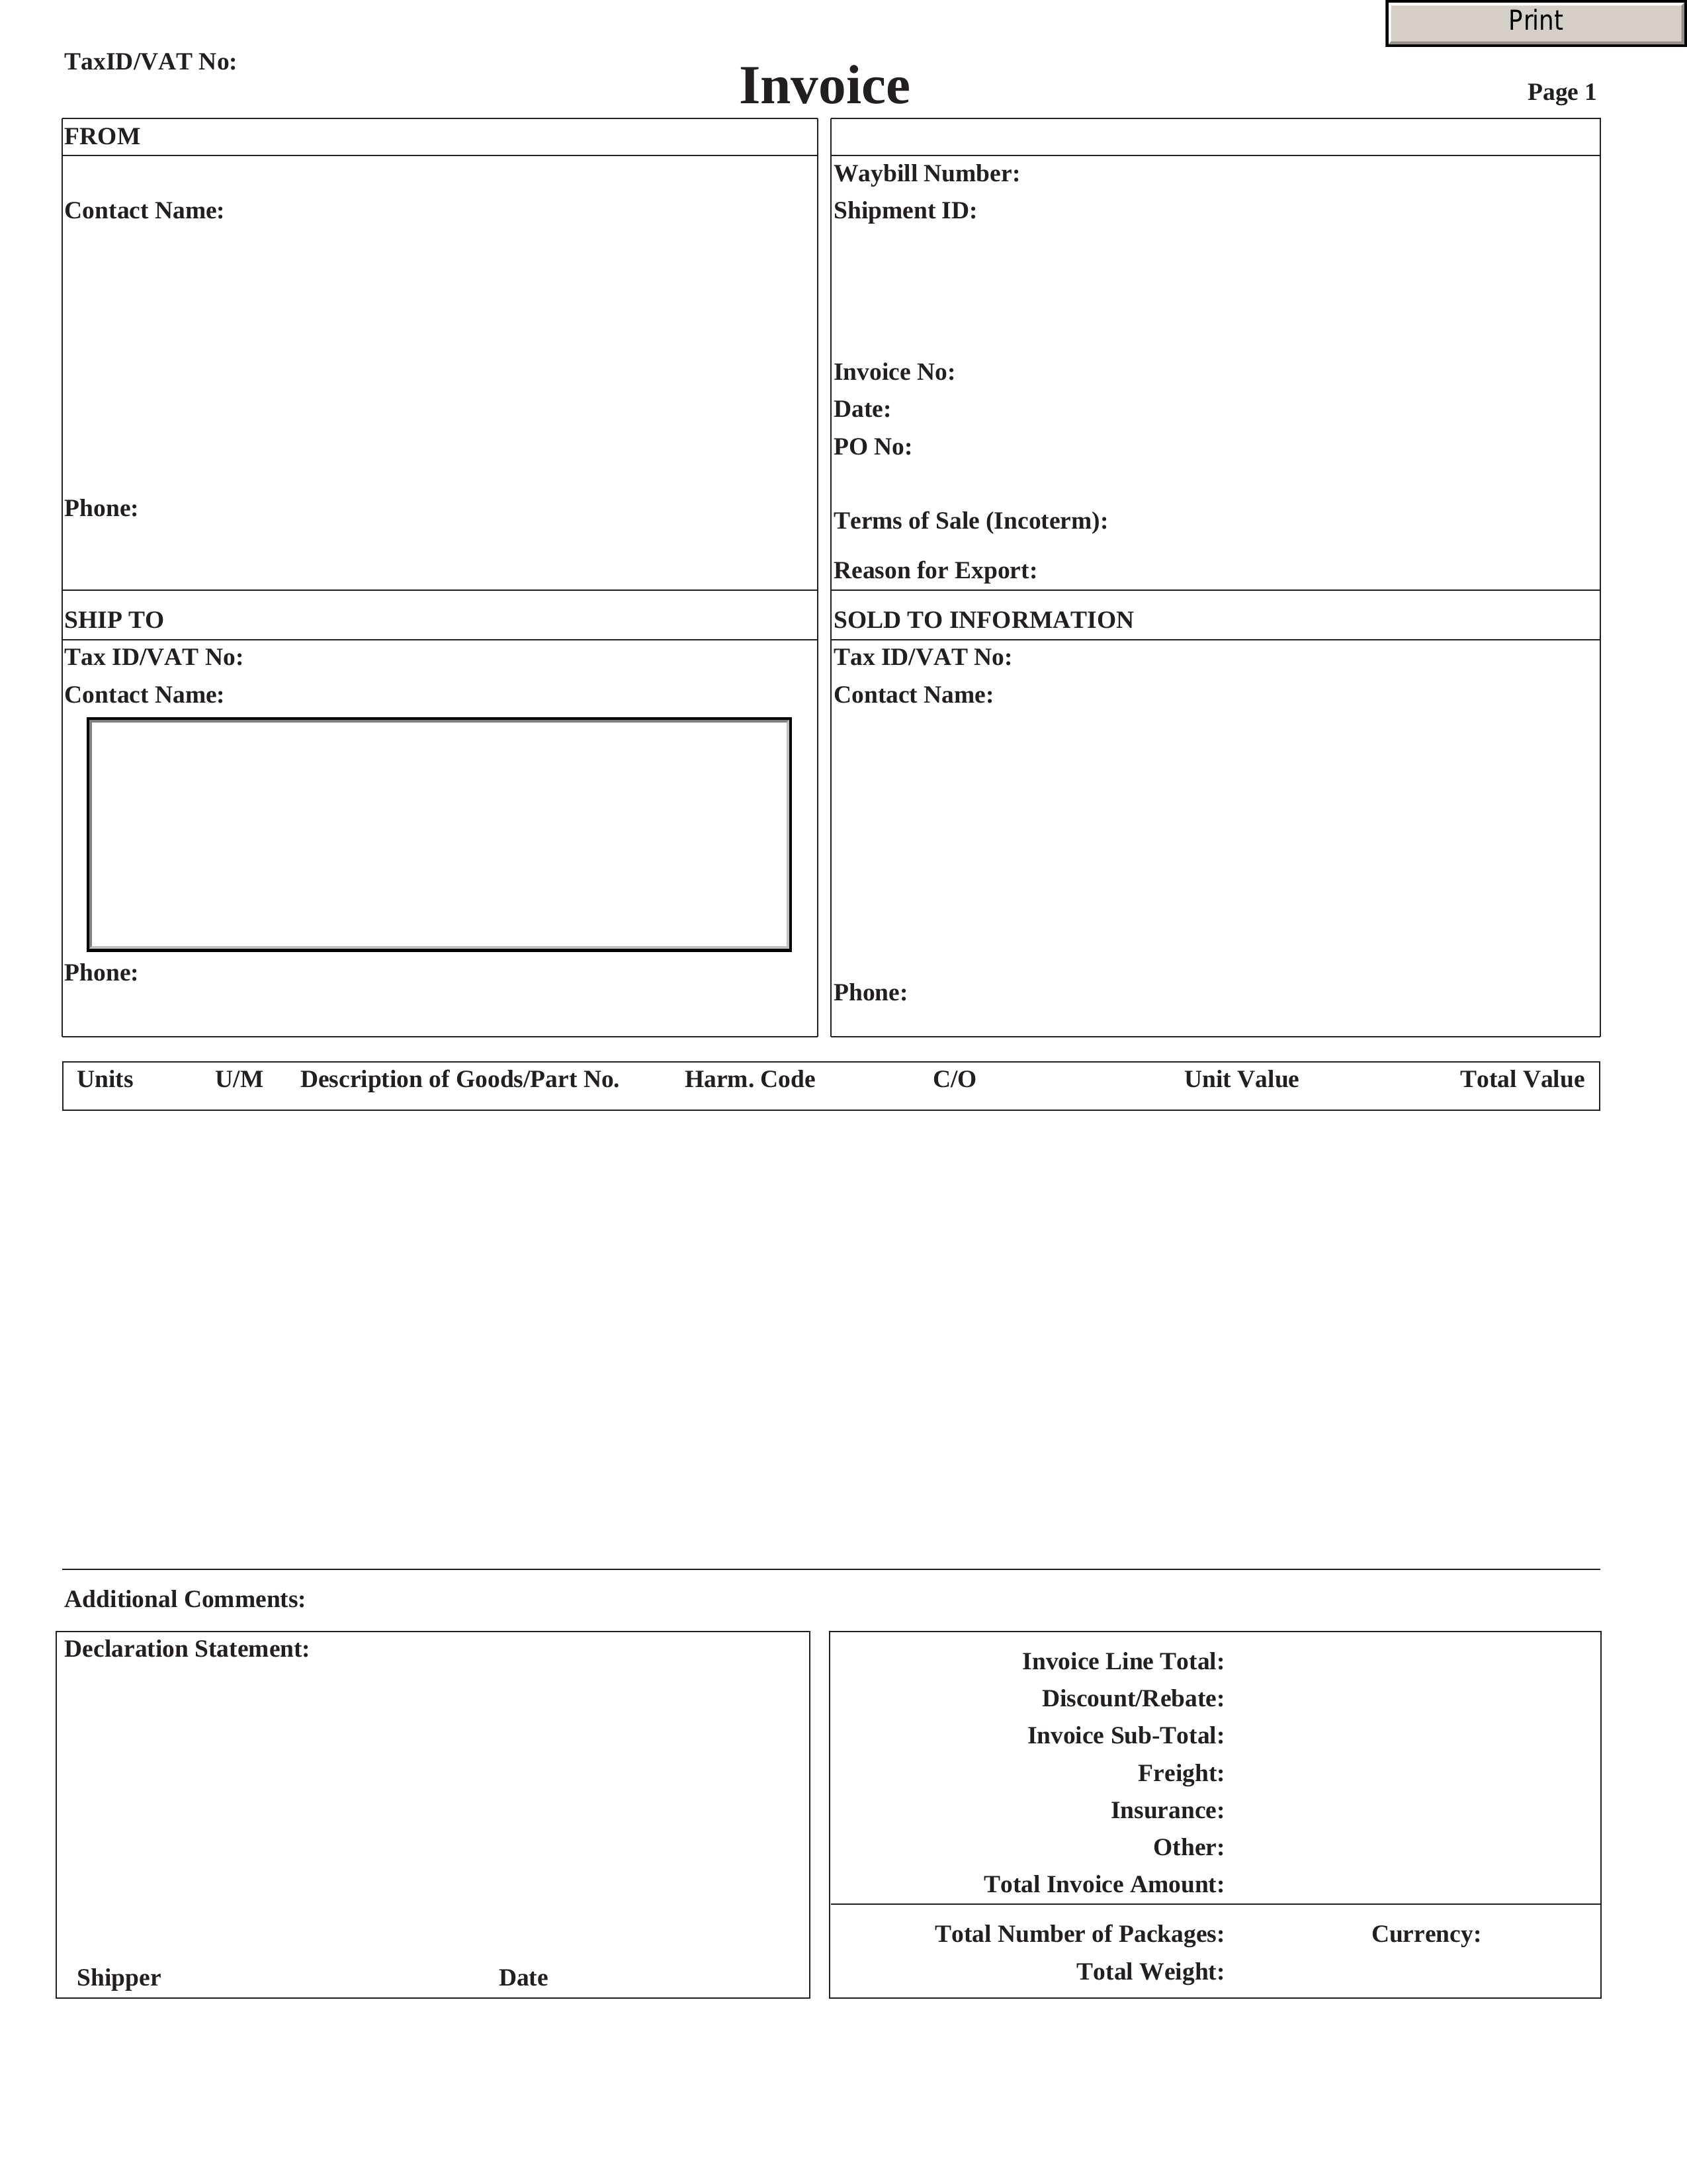 cbp commercial invoice template Within Customs Commercial Invoice Template